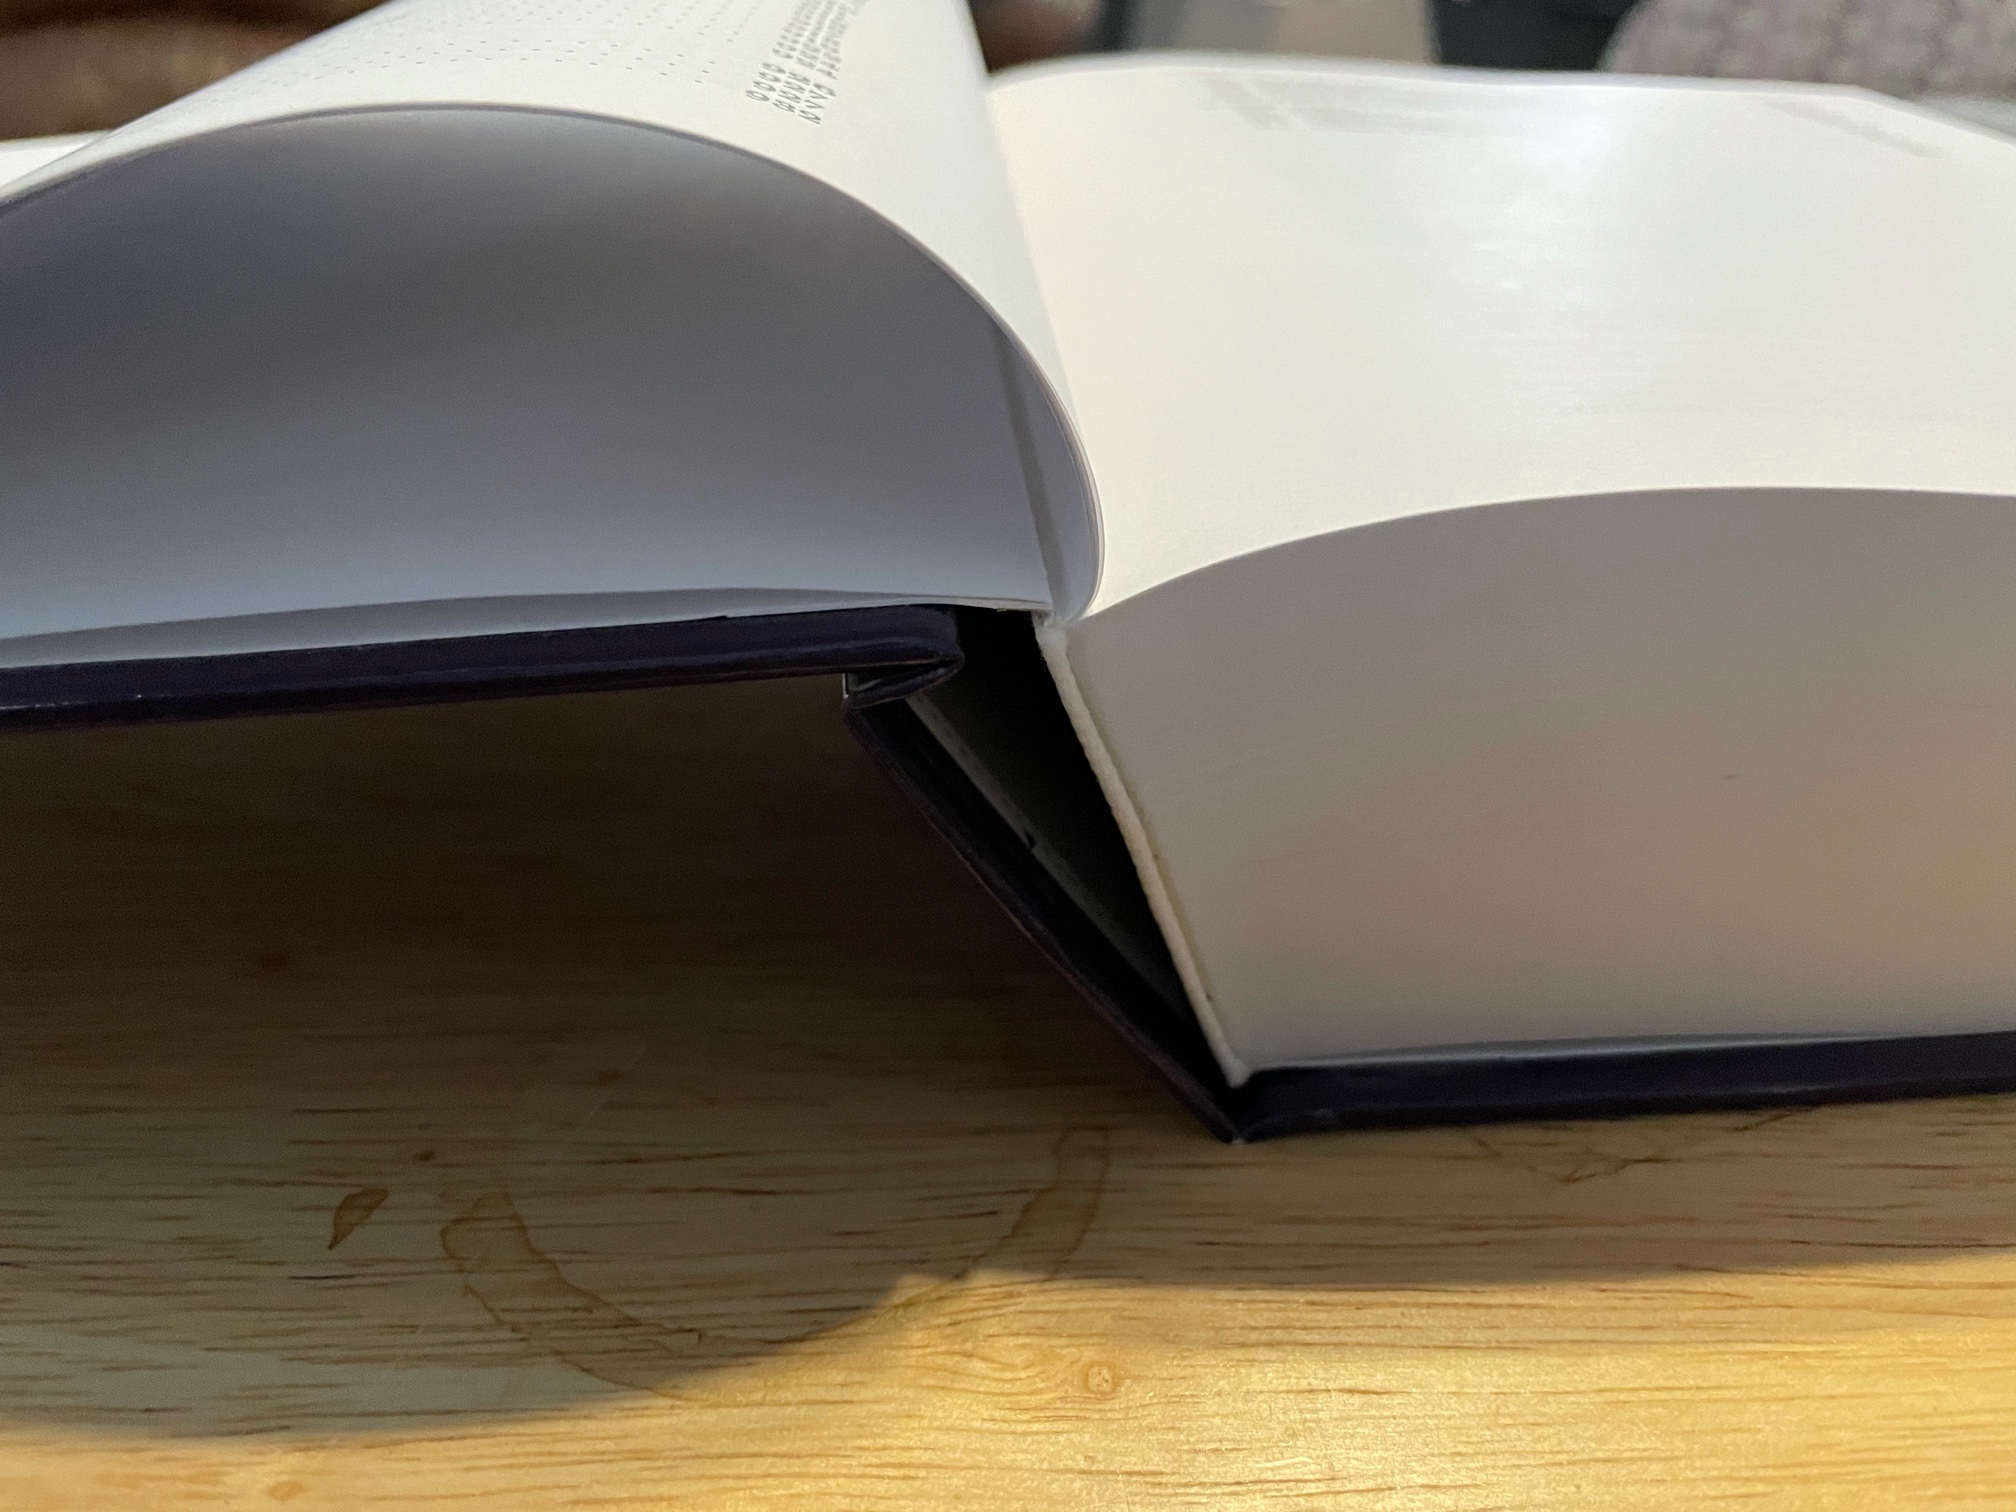 Image of Haskell Book print test copy, facing spine, demonstrating lay flat binding